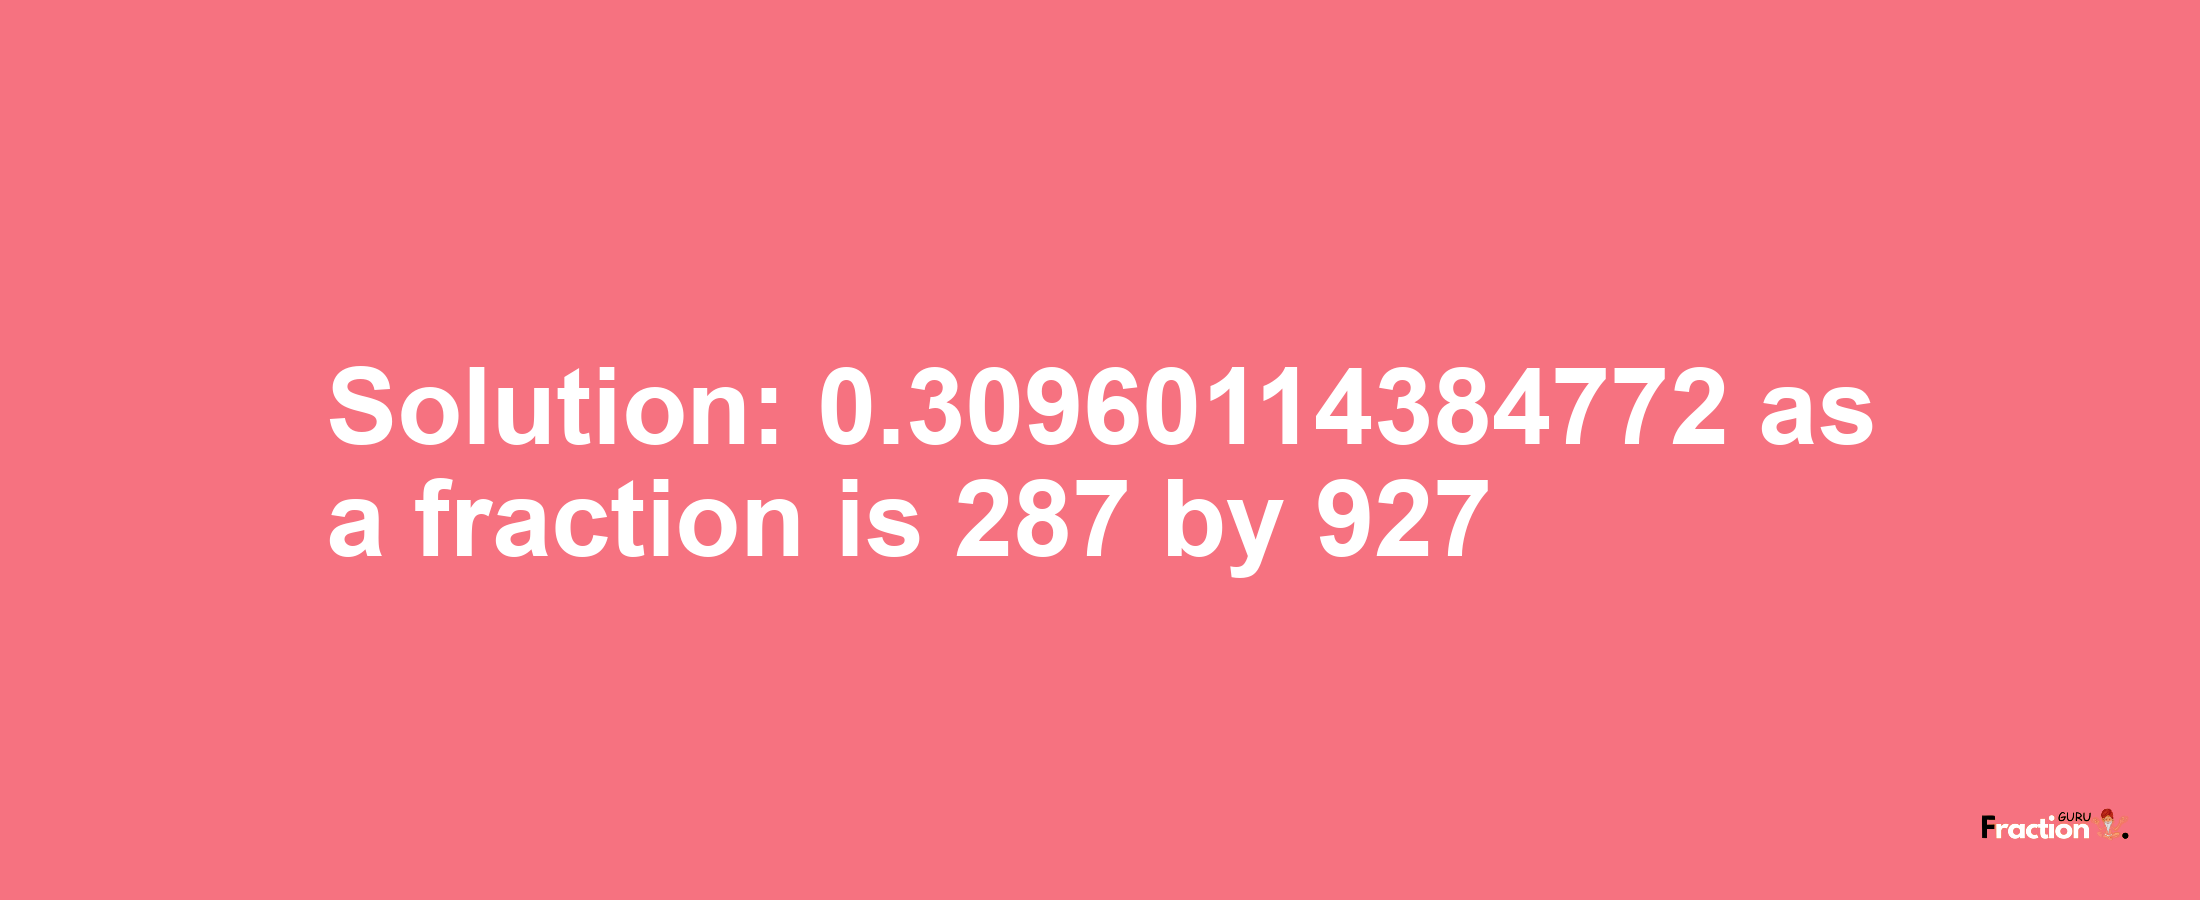 Solution:0.30960114384772 as a fraction is 287/927